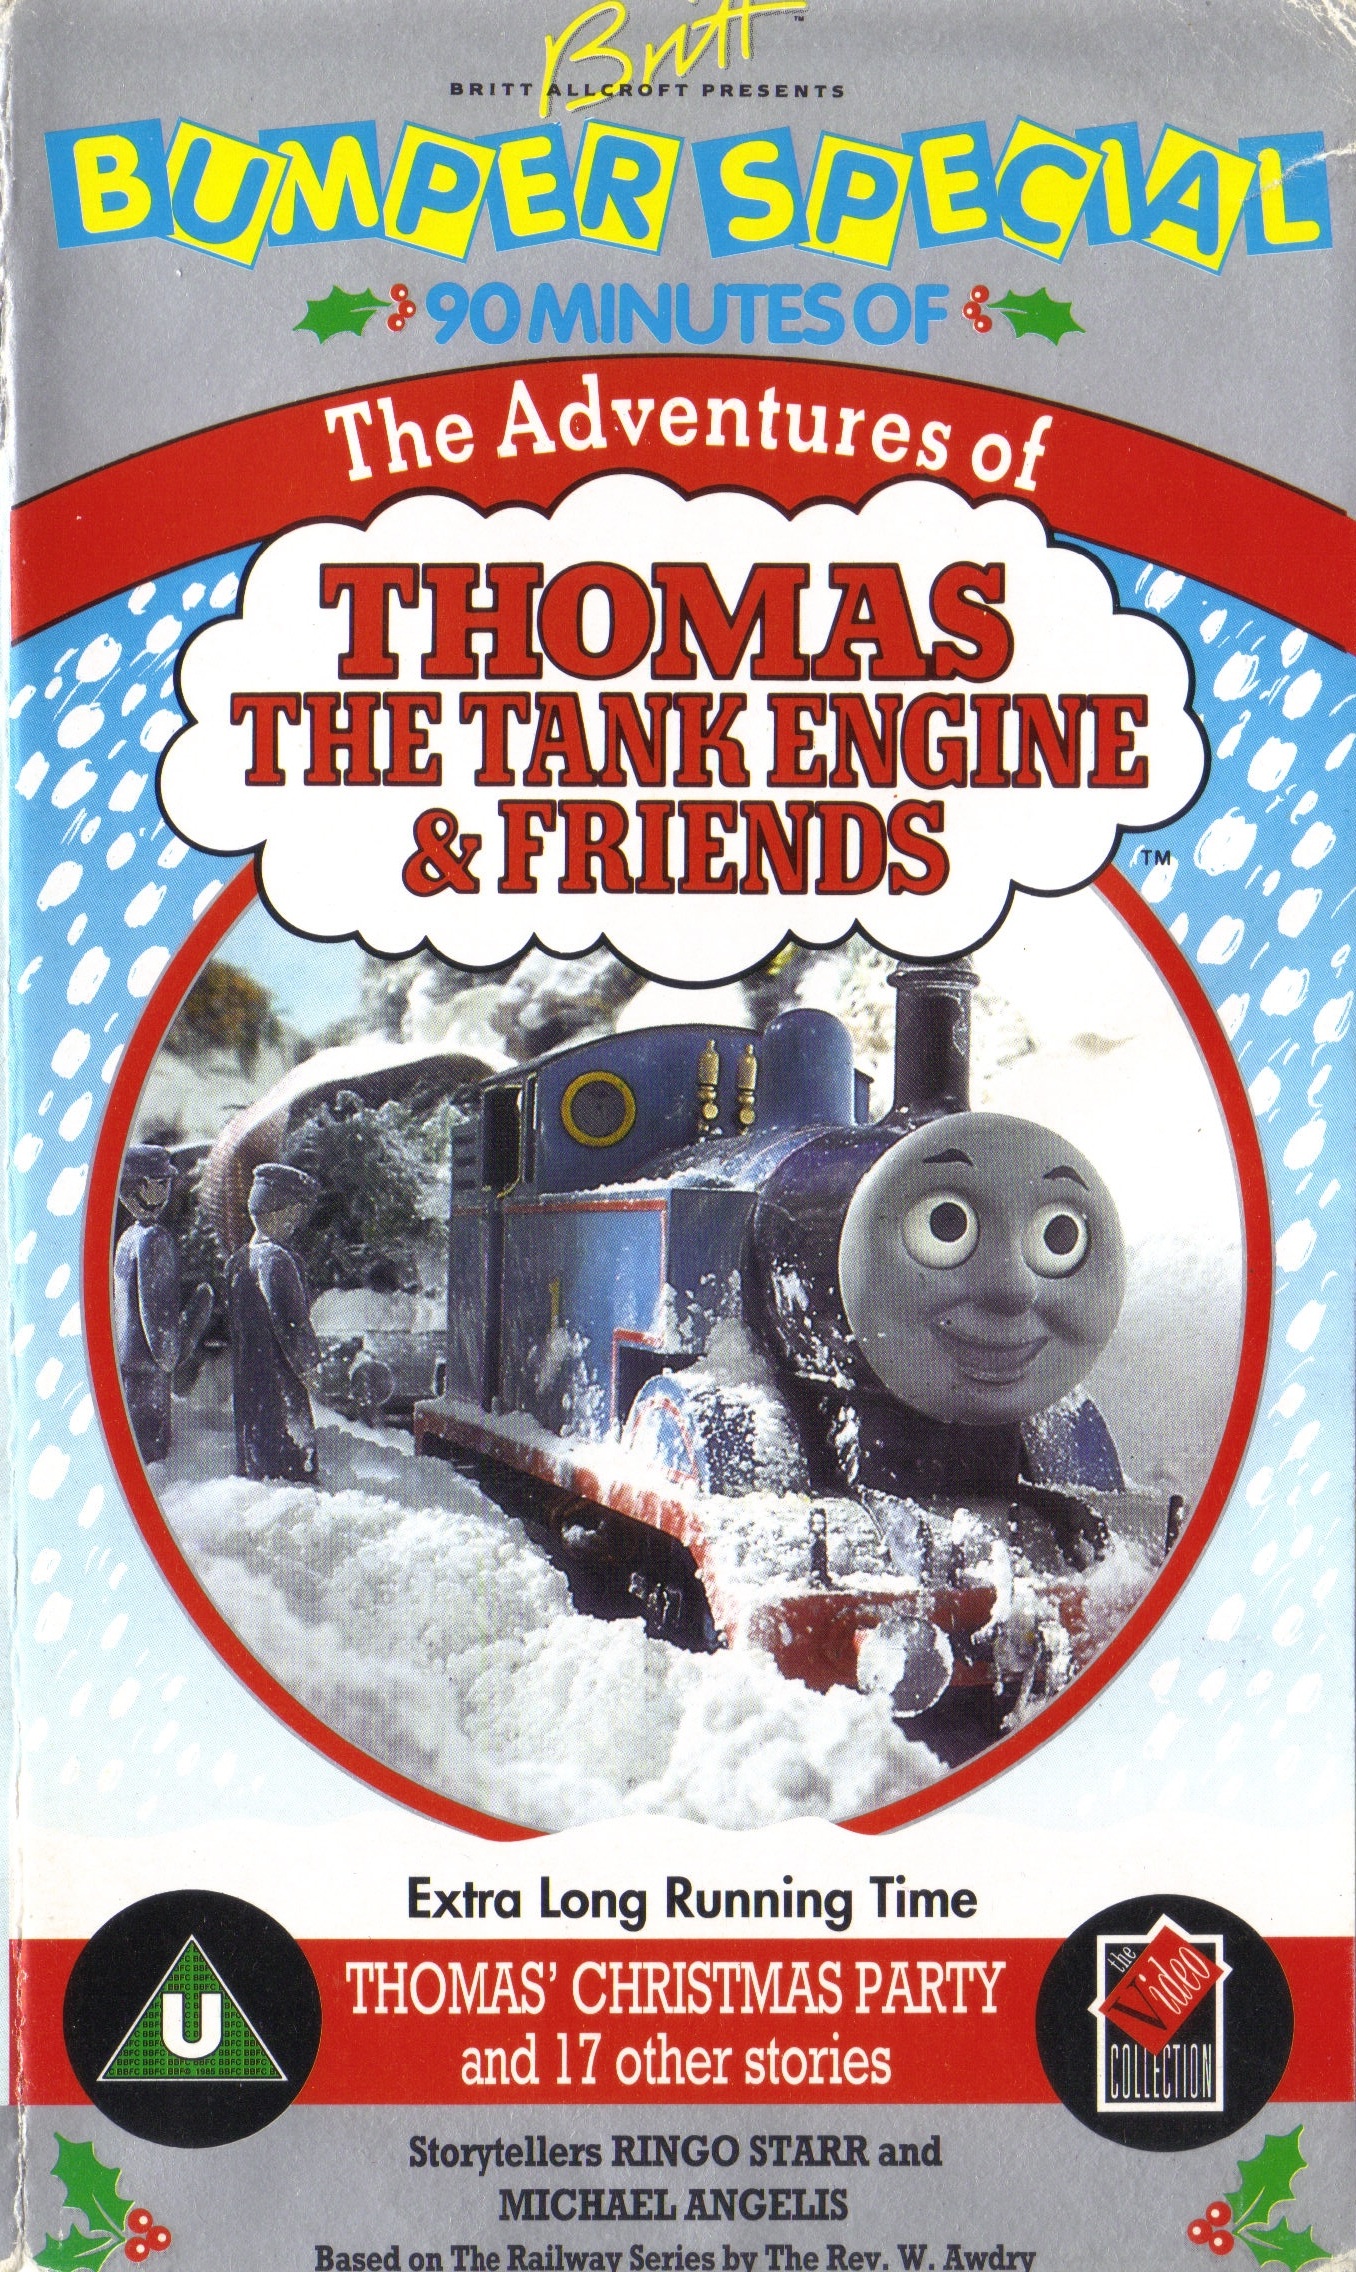 Thomas Christmas Party and 17 other stories